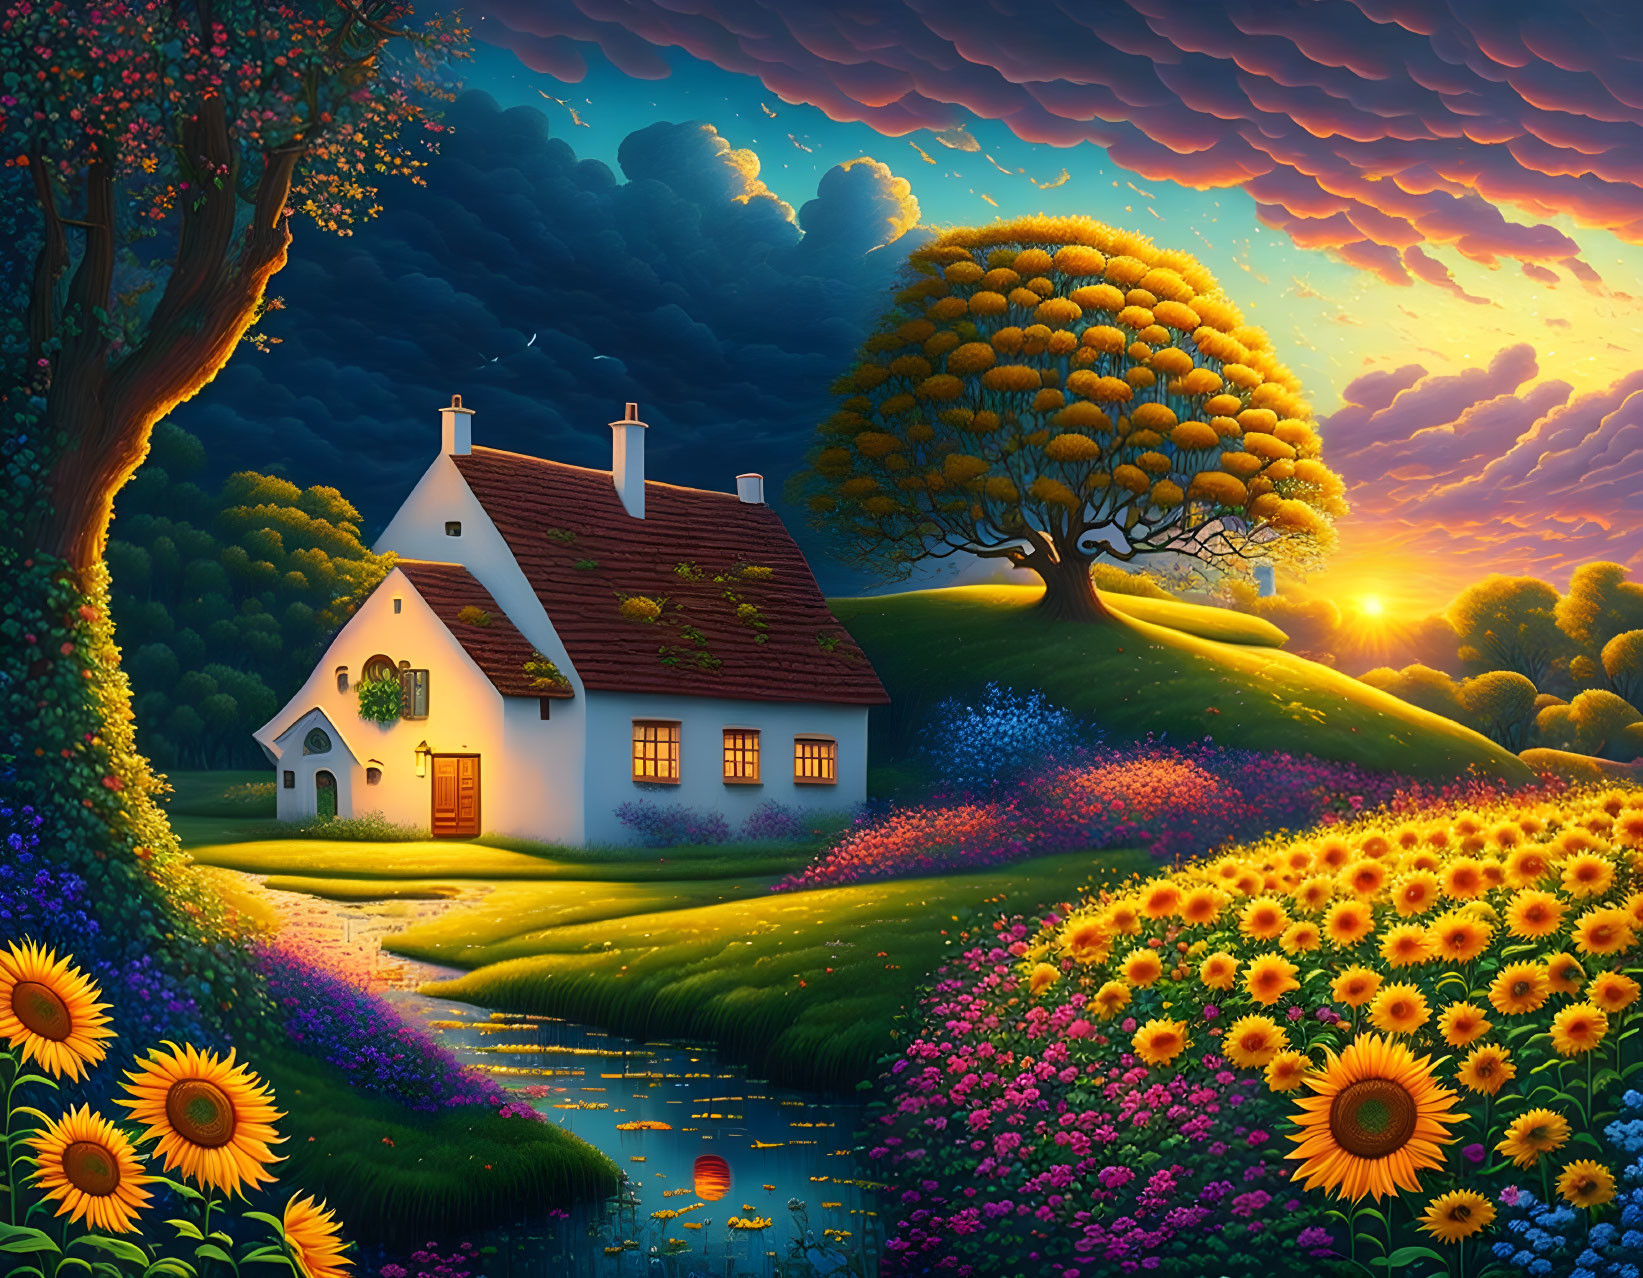 Thatched roof cottage by river with vibrant flowers under sunset sky